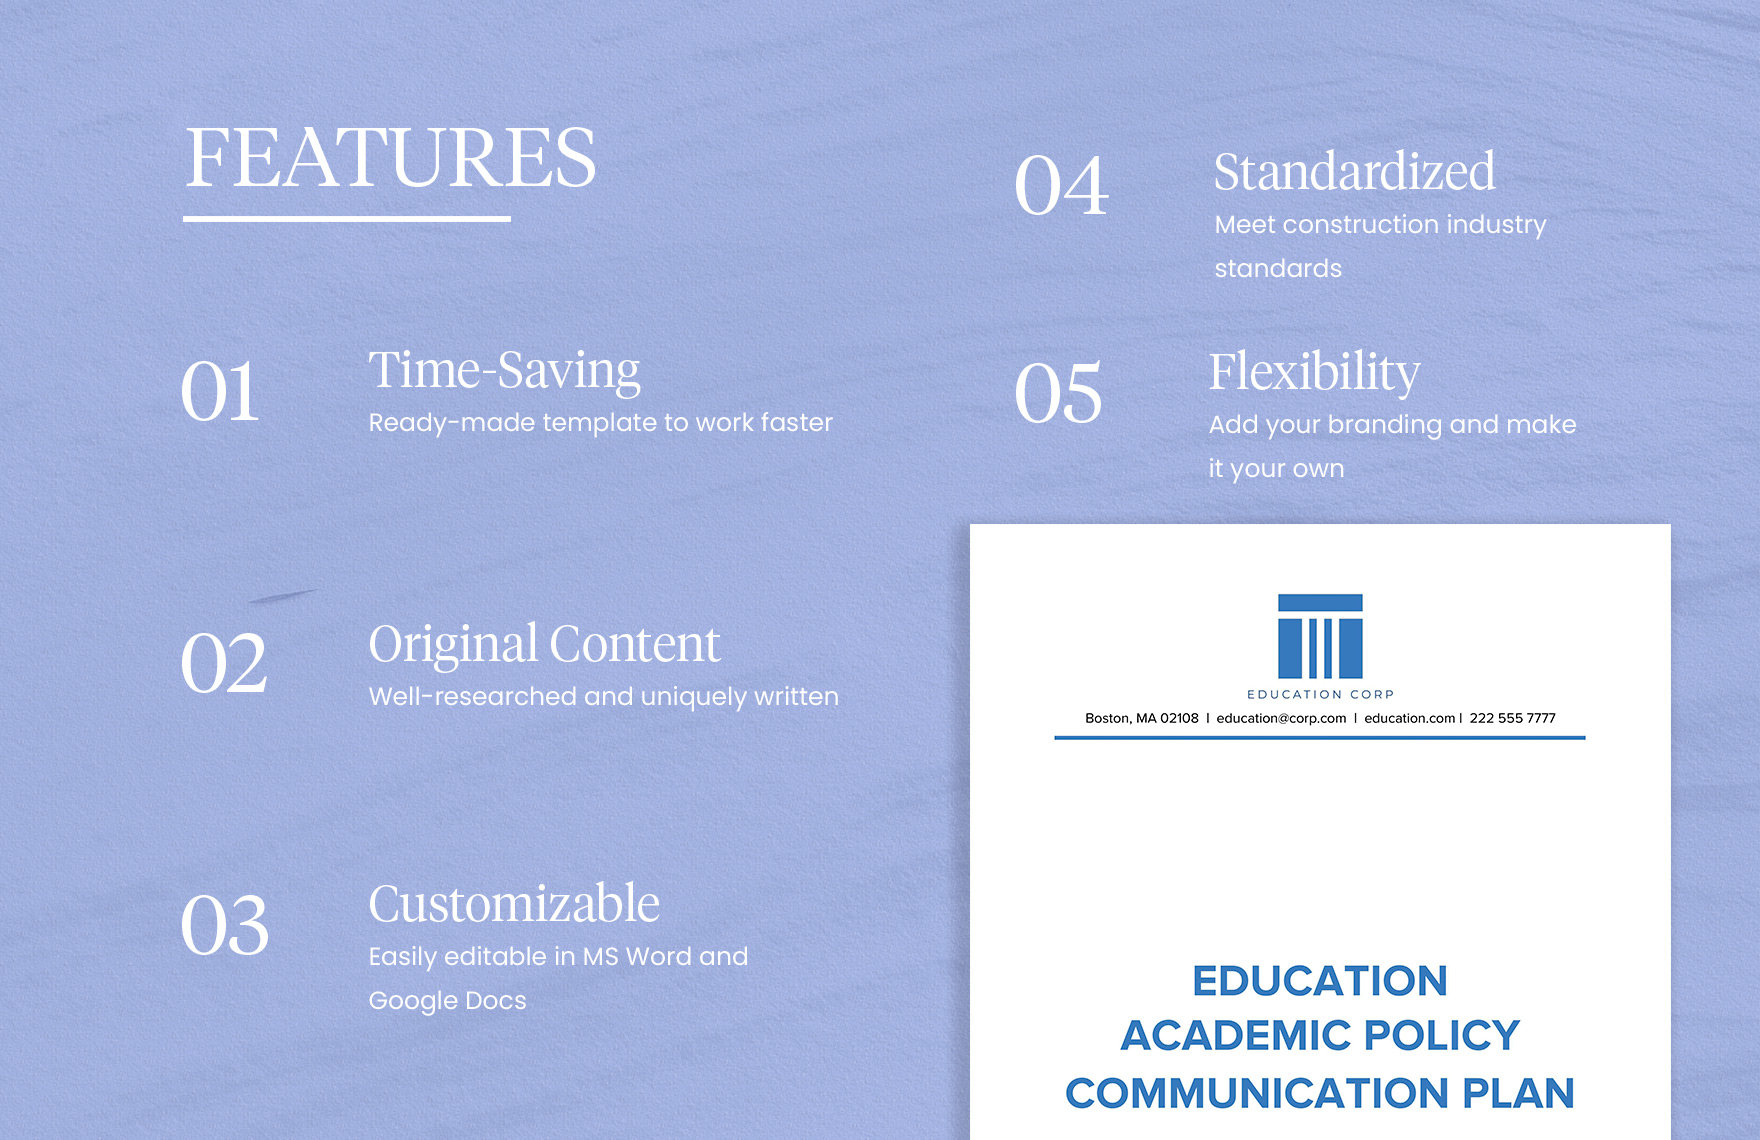 Education Academic Policy Communication Plan